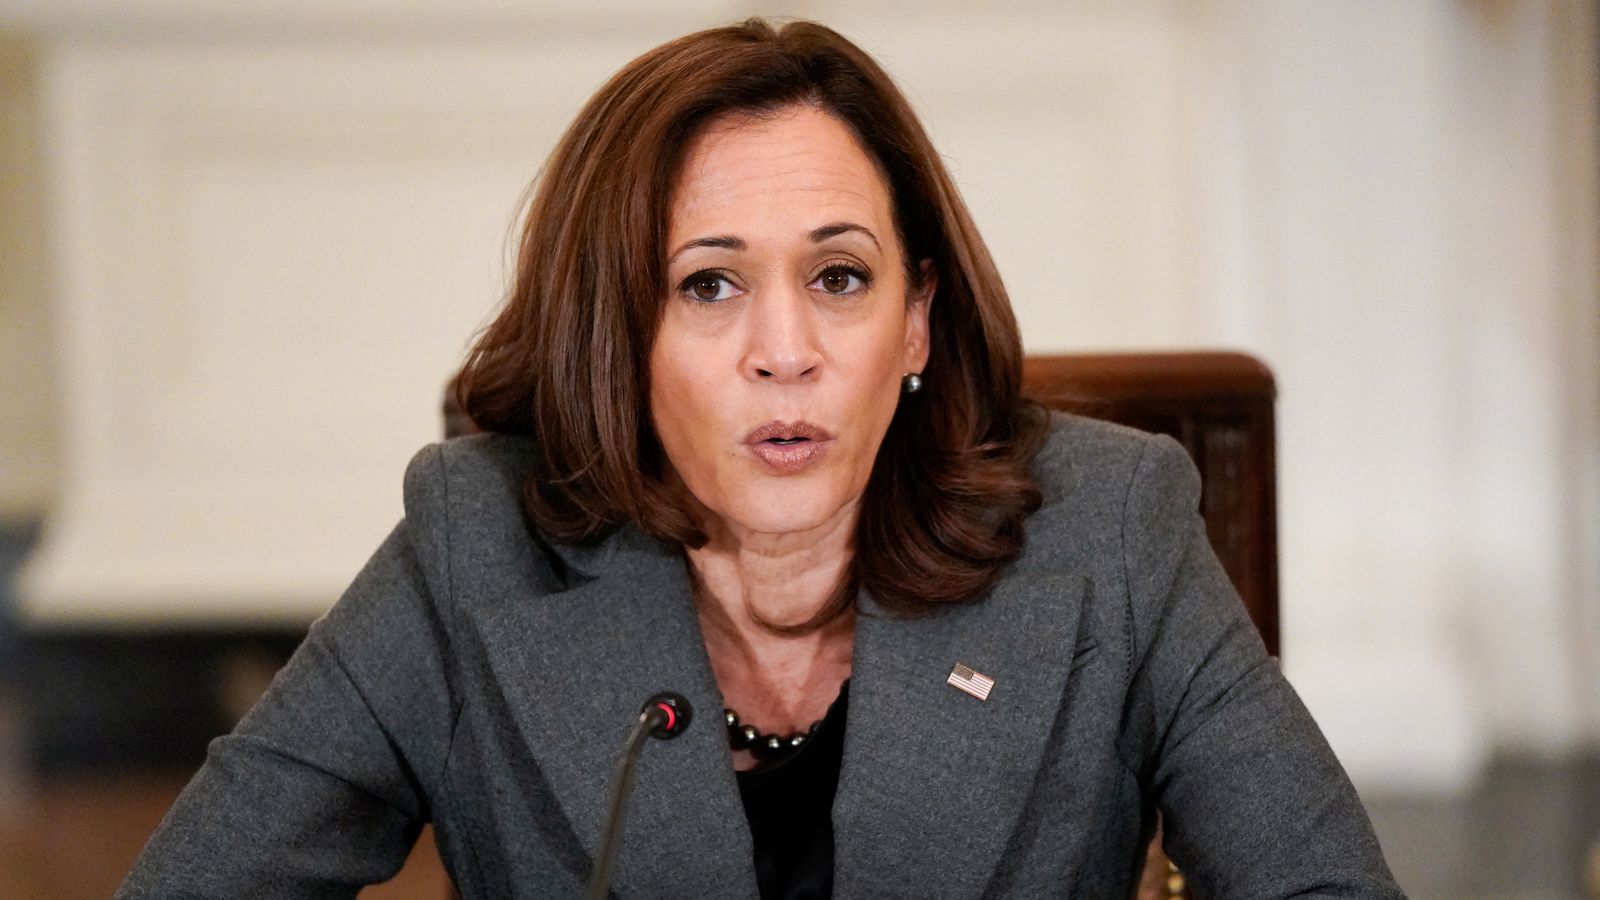 US vice president Kamala Harris involved in car accident which Secret Service initially described as a 'mechanical failure'